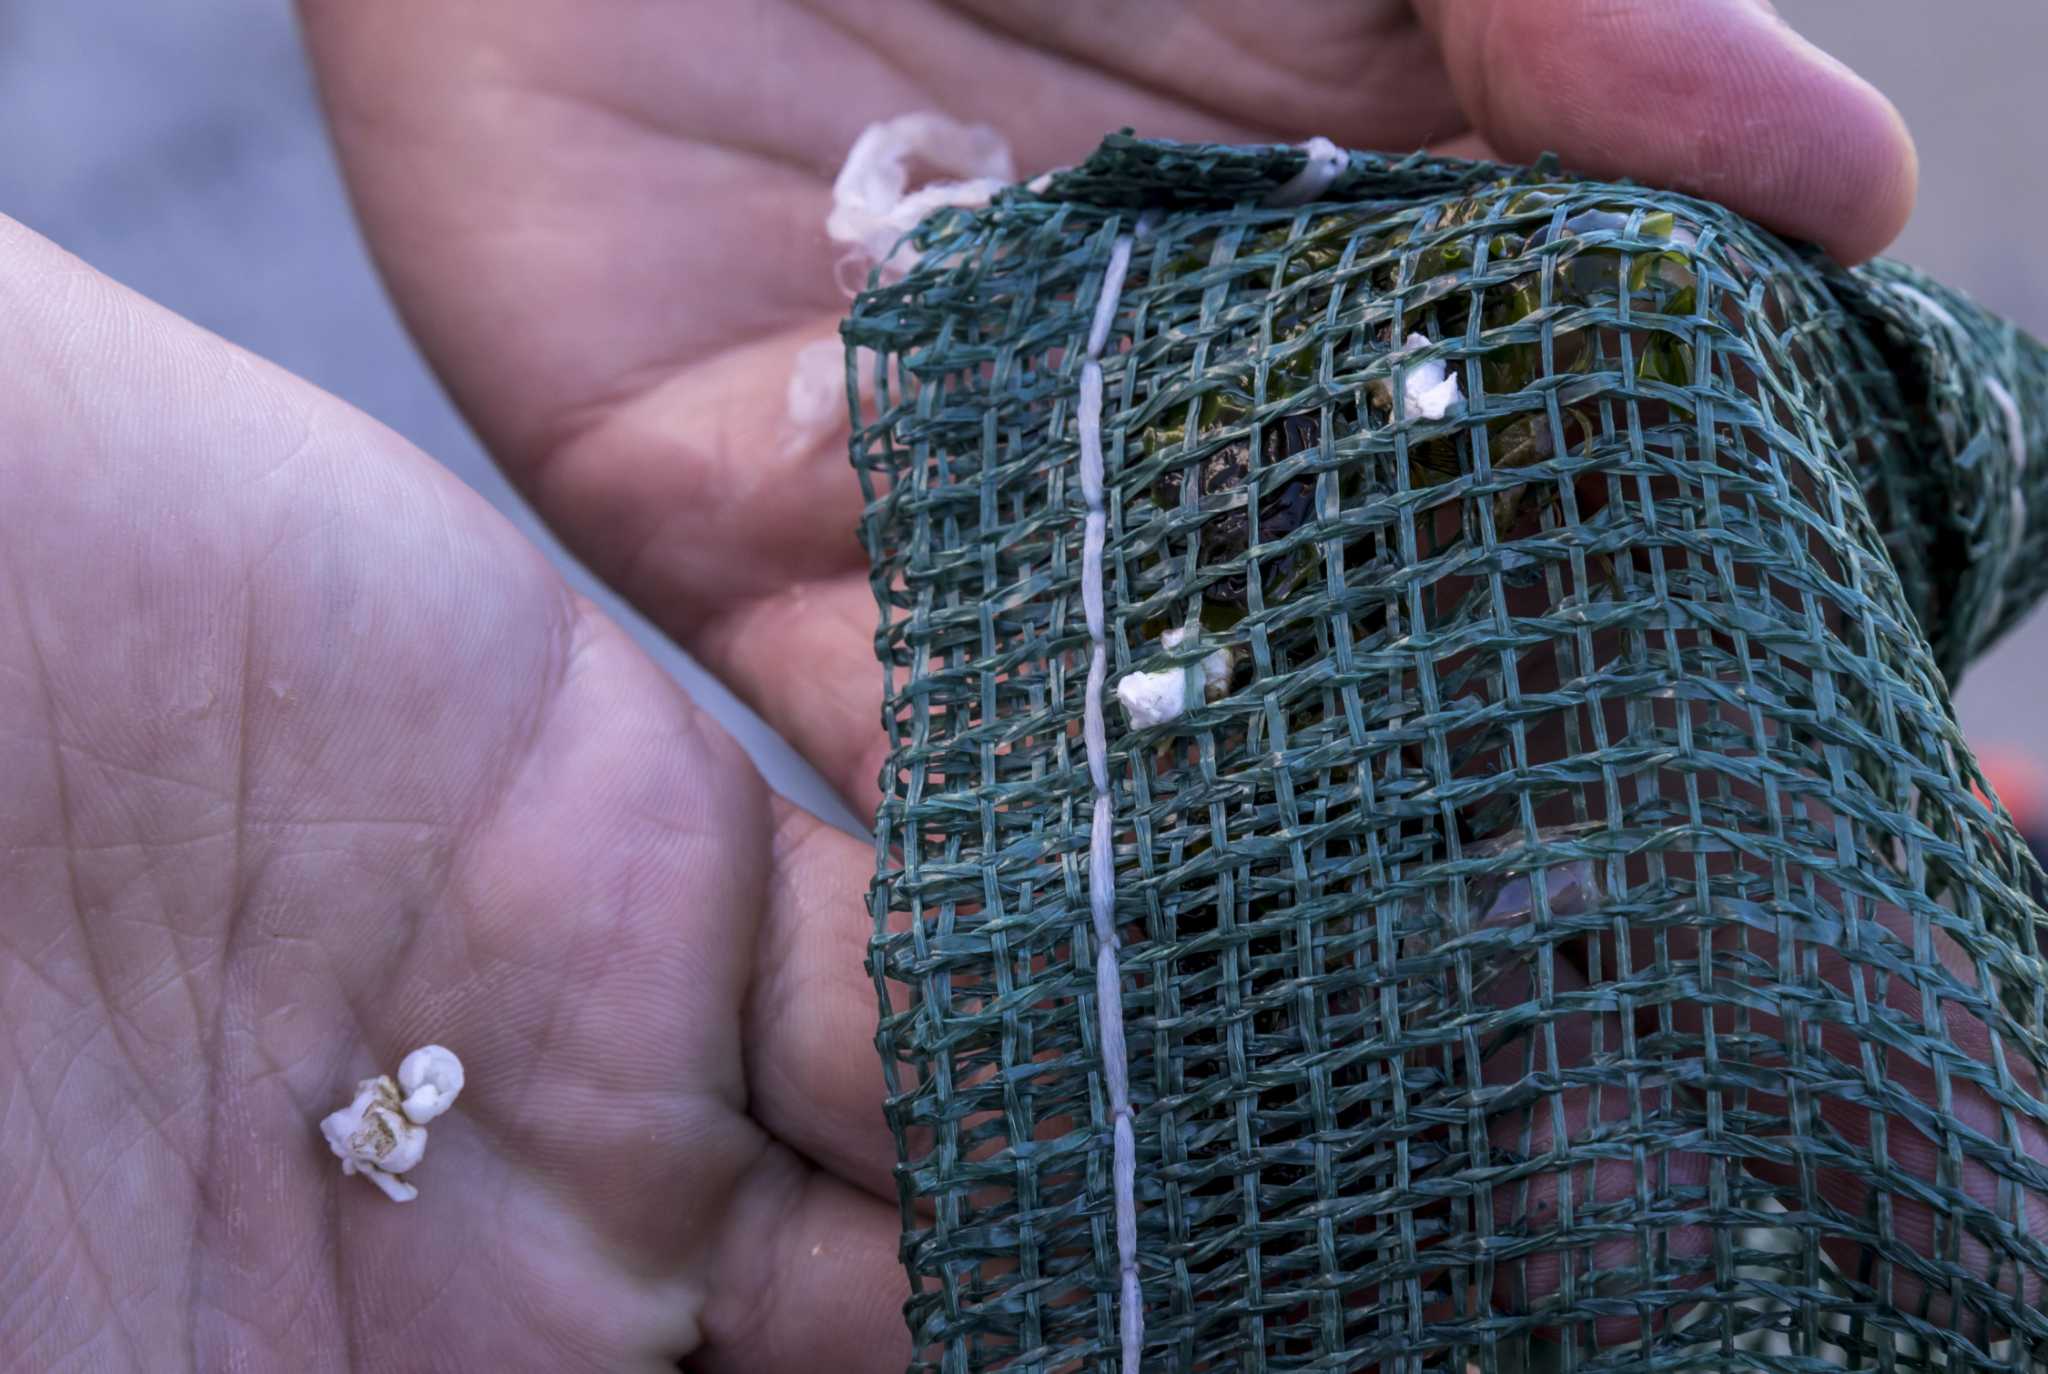 One Bay Area harbor is trying a first-in-the-nation strategy to combat plastic pollution